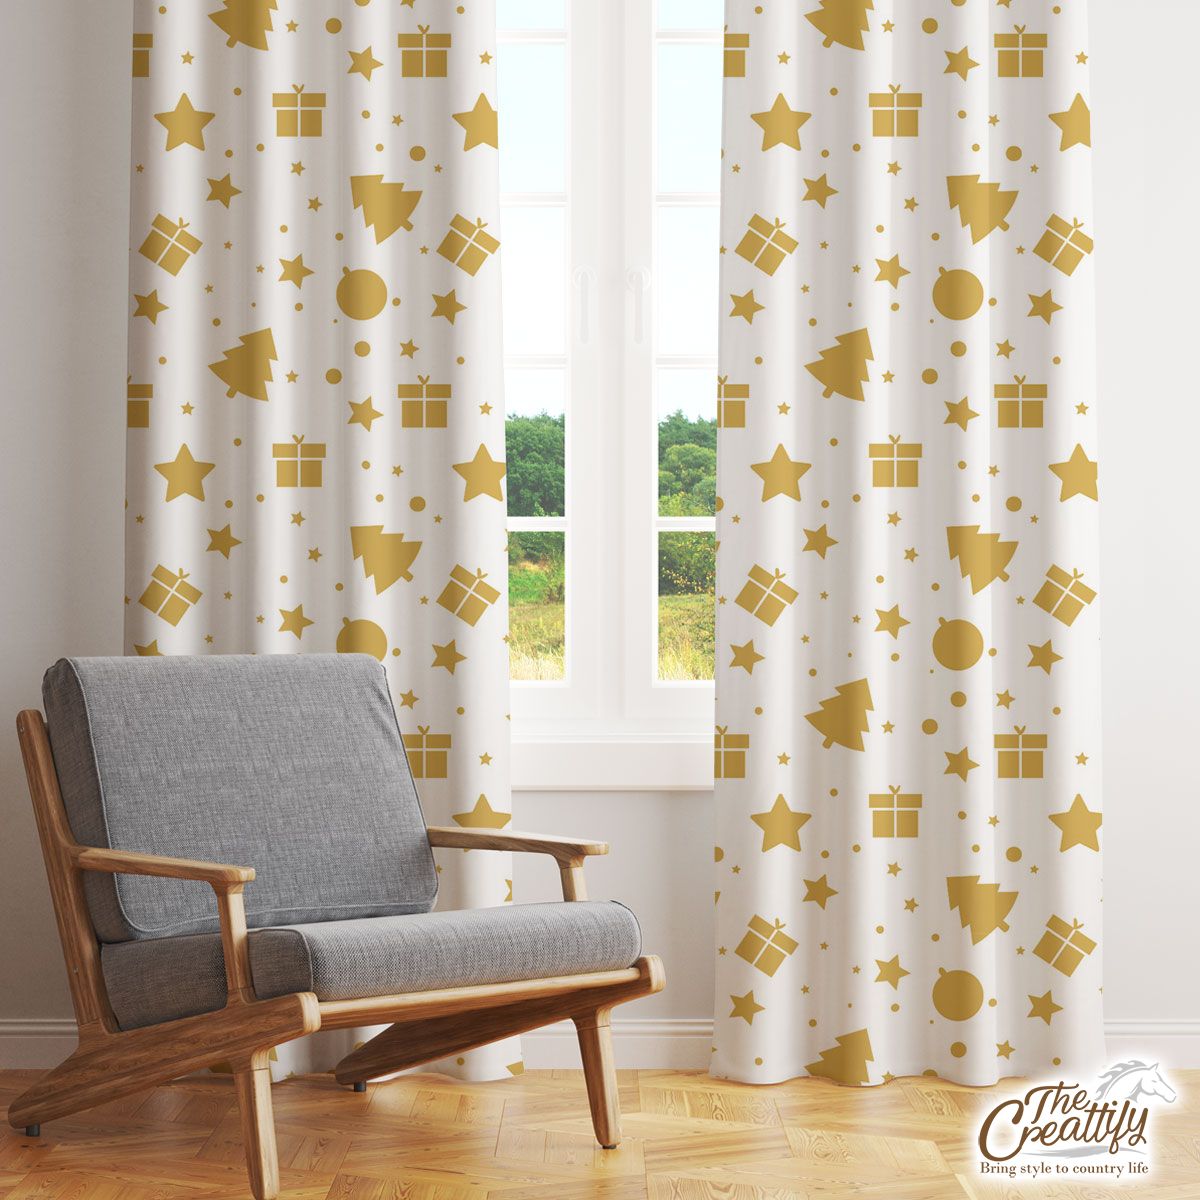 Christmas Gifts, Baudles And Pine Tree Silhouette Filled In Gold Color Pattern Window Curtain